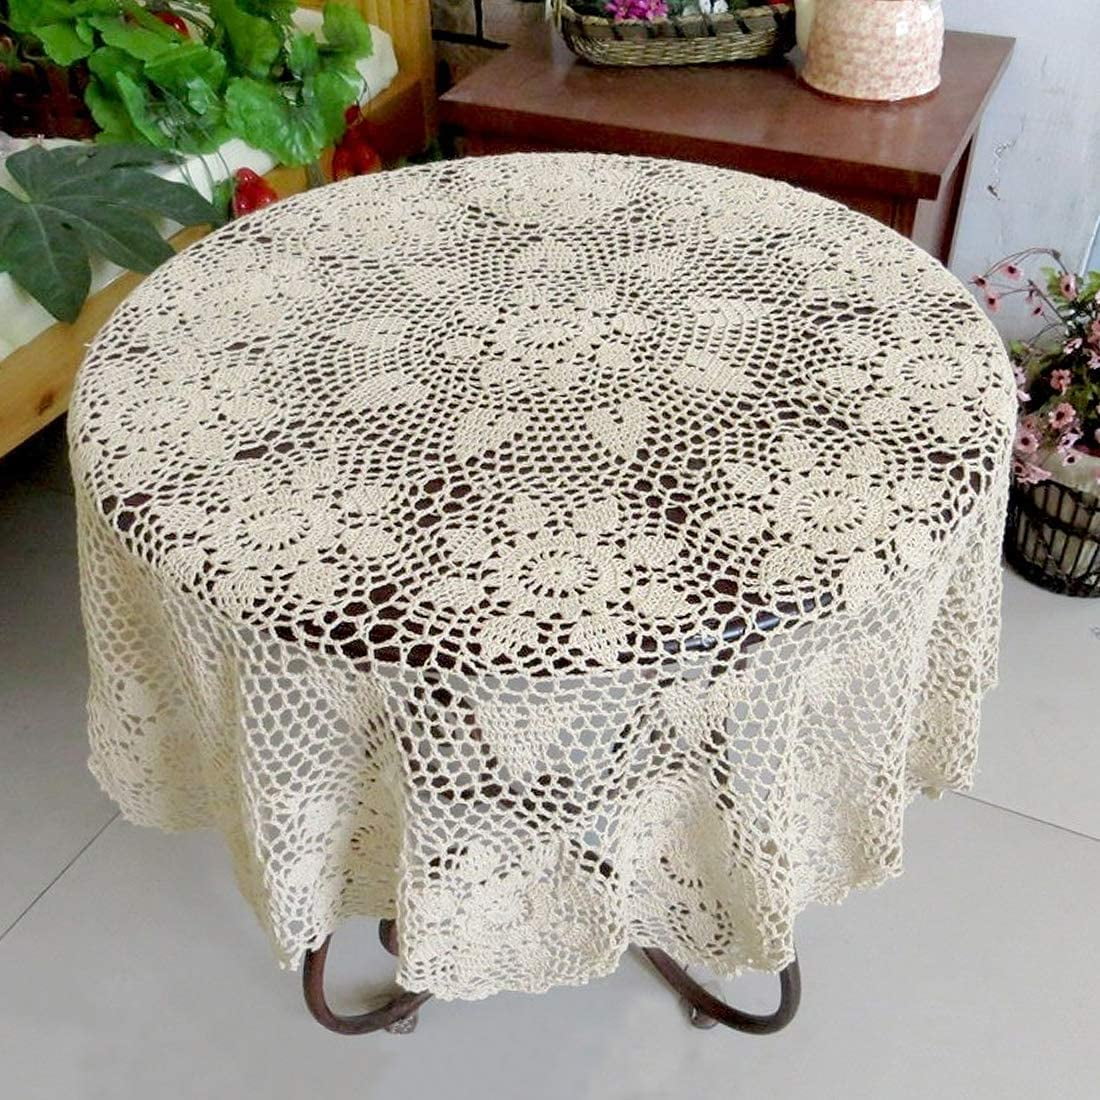 PURE  White Lace Table Runner 54"  Doily  Cut work  Waterlily Flower  Doilies 